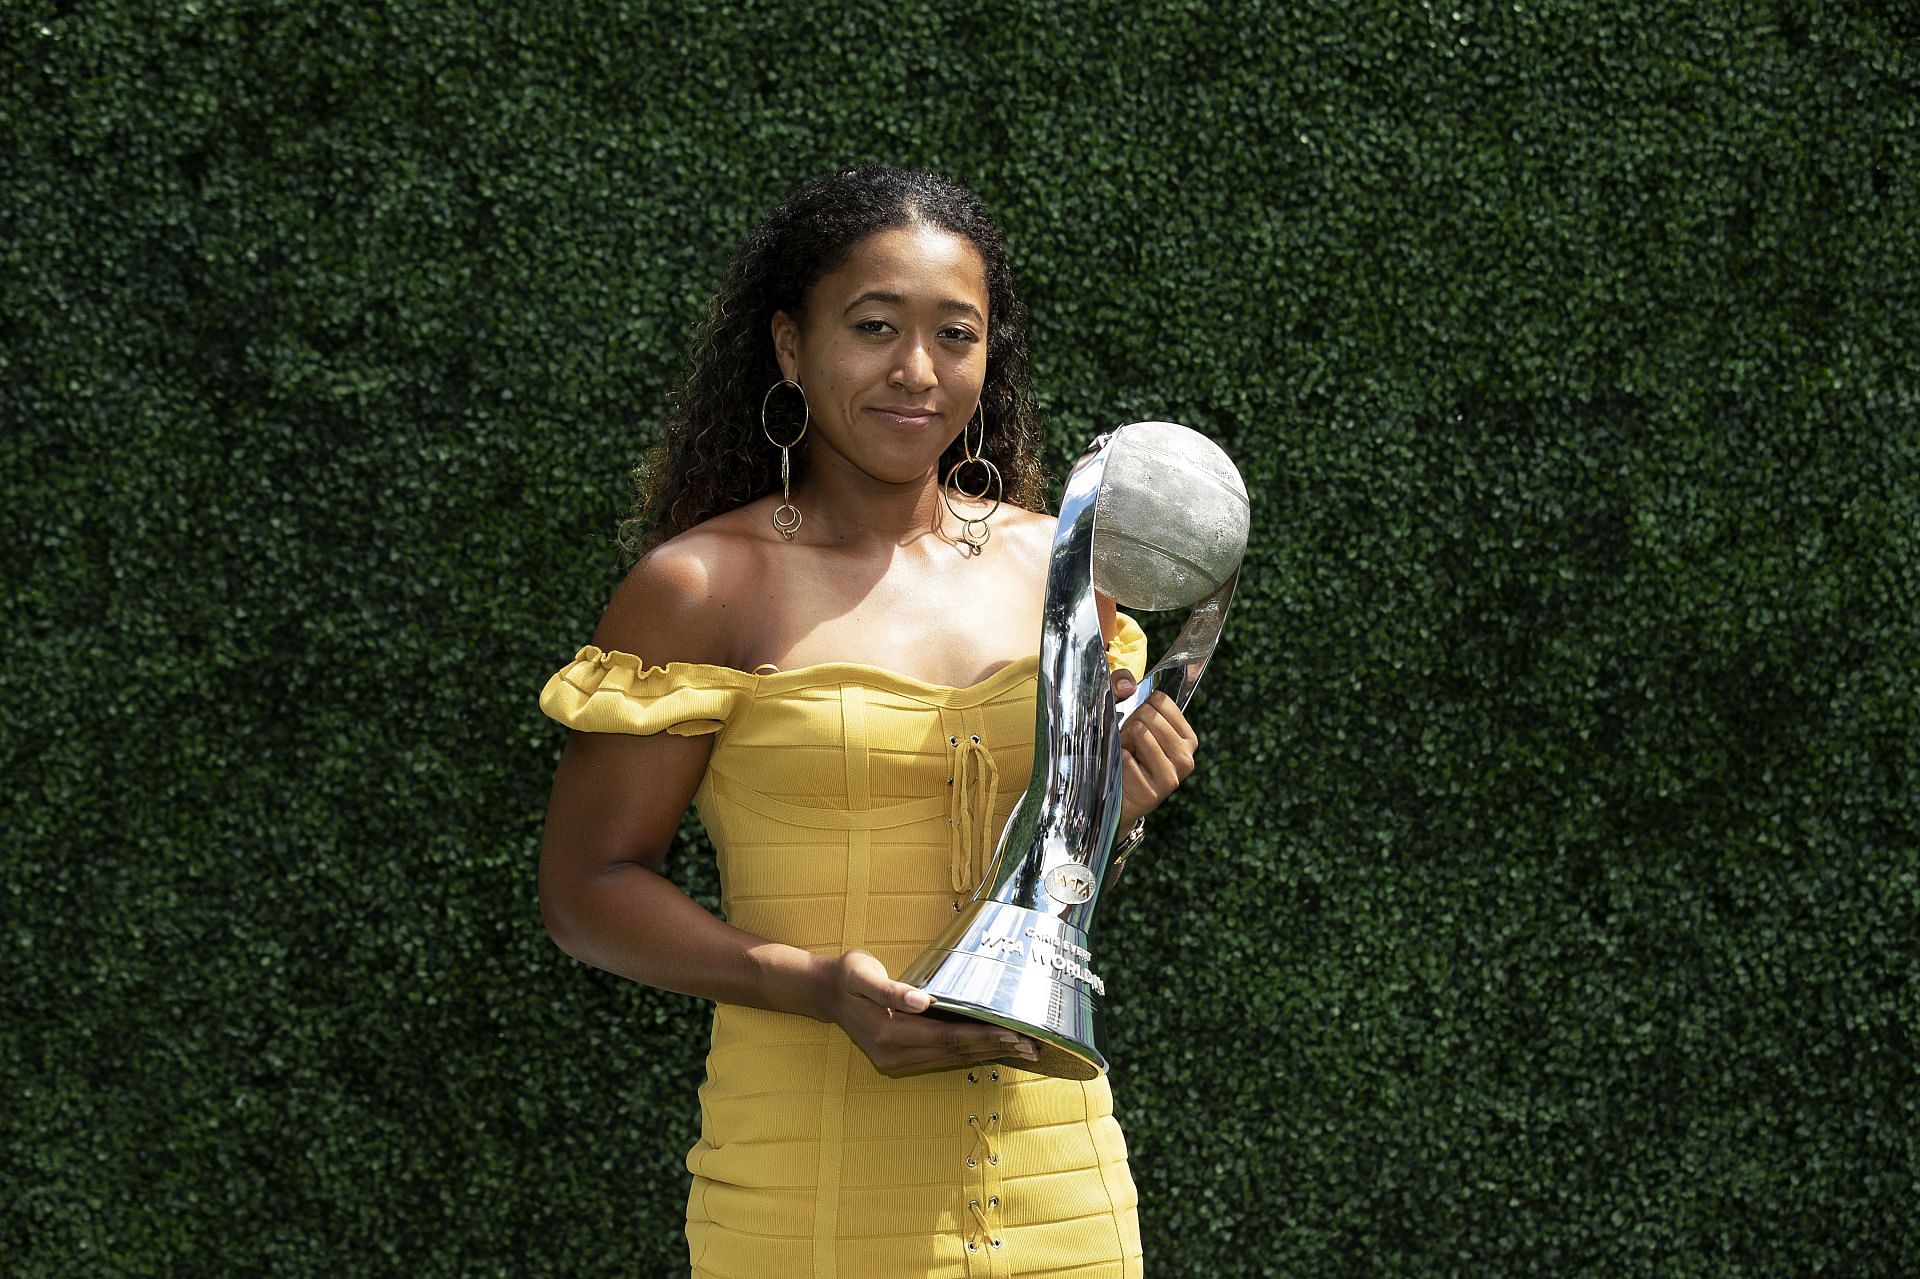 Naomi Osaka revealed that she wanted to rise to the top of the WTA rankings by next year at the latest